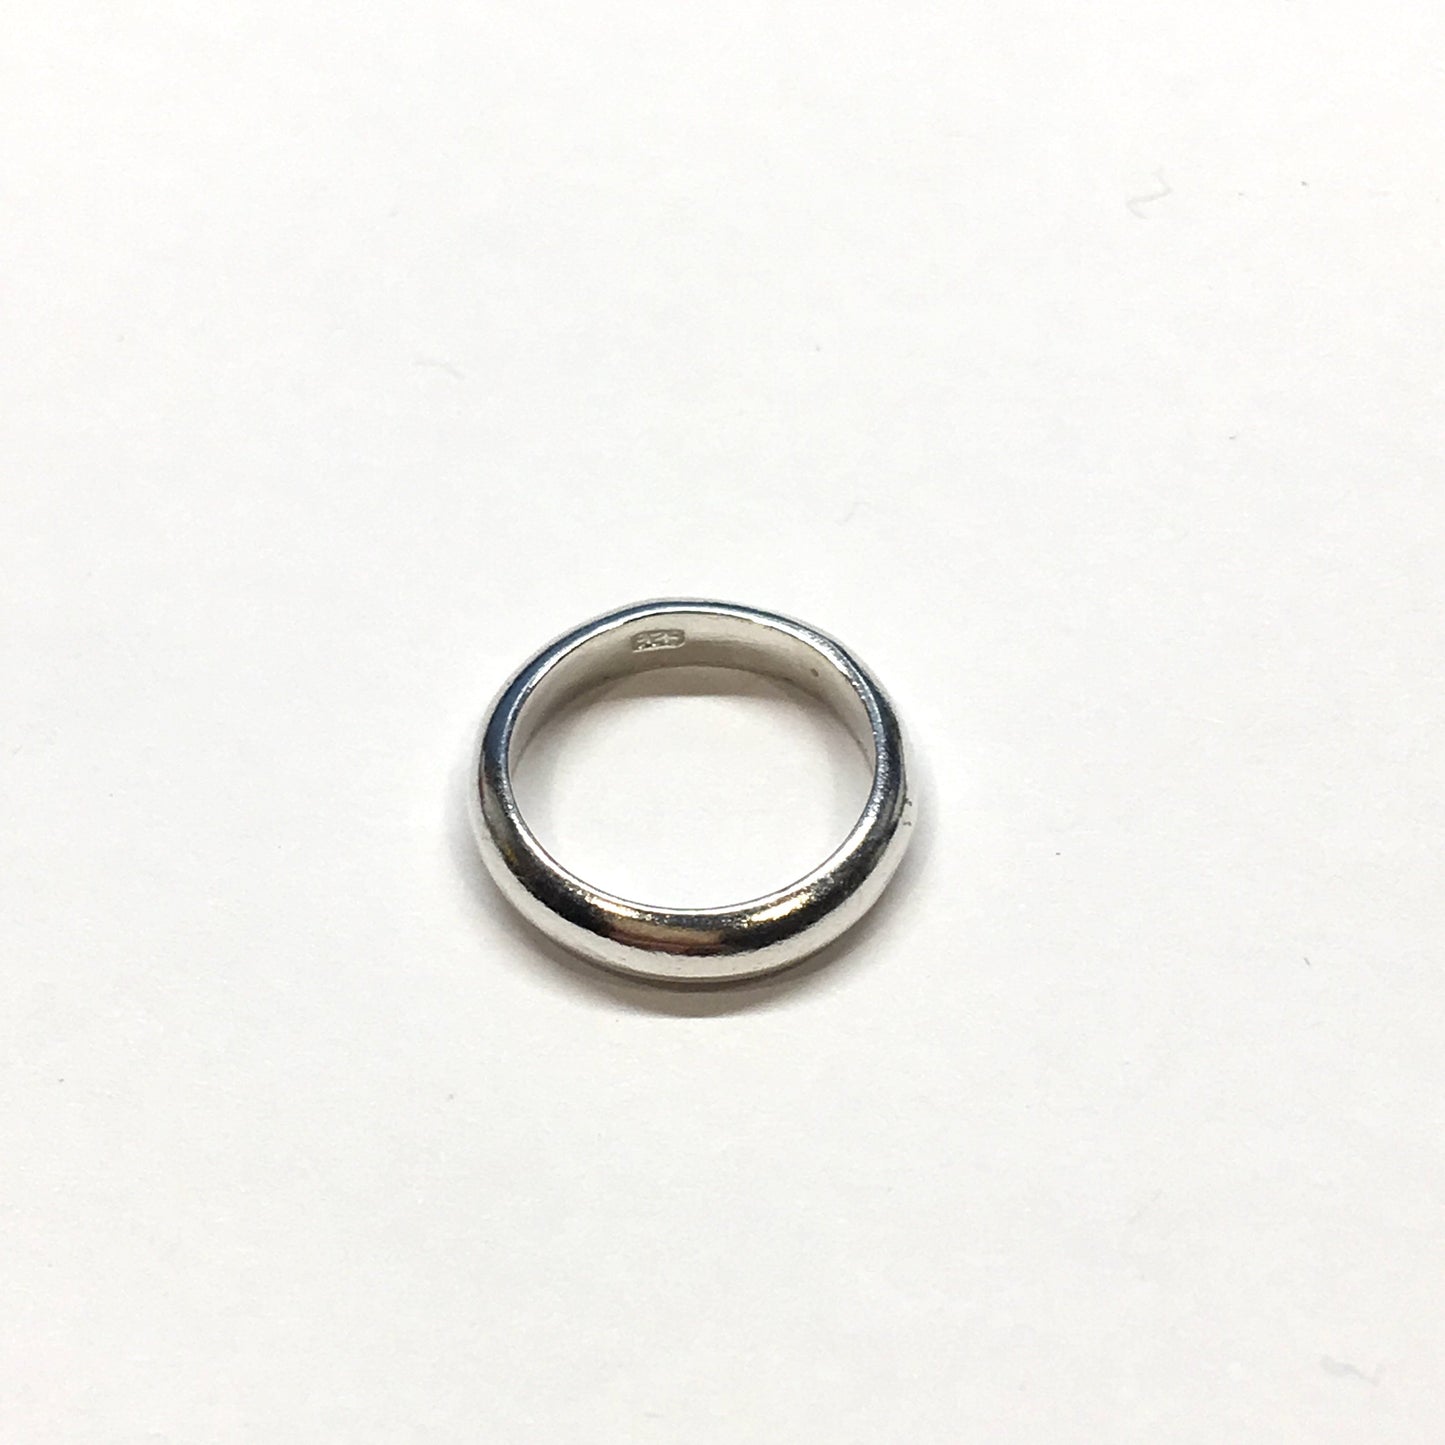 Silver Ring | Sterling Silver Wedding Ring Charm or Baby Ring / Midi Ring sz 0  | Jewelry Findings at Blingschlingers Jewelry